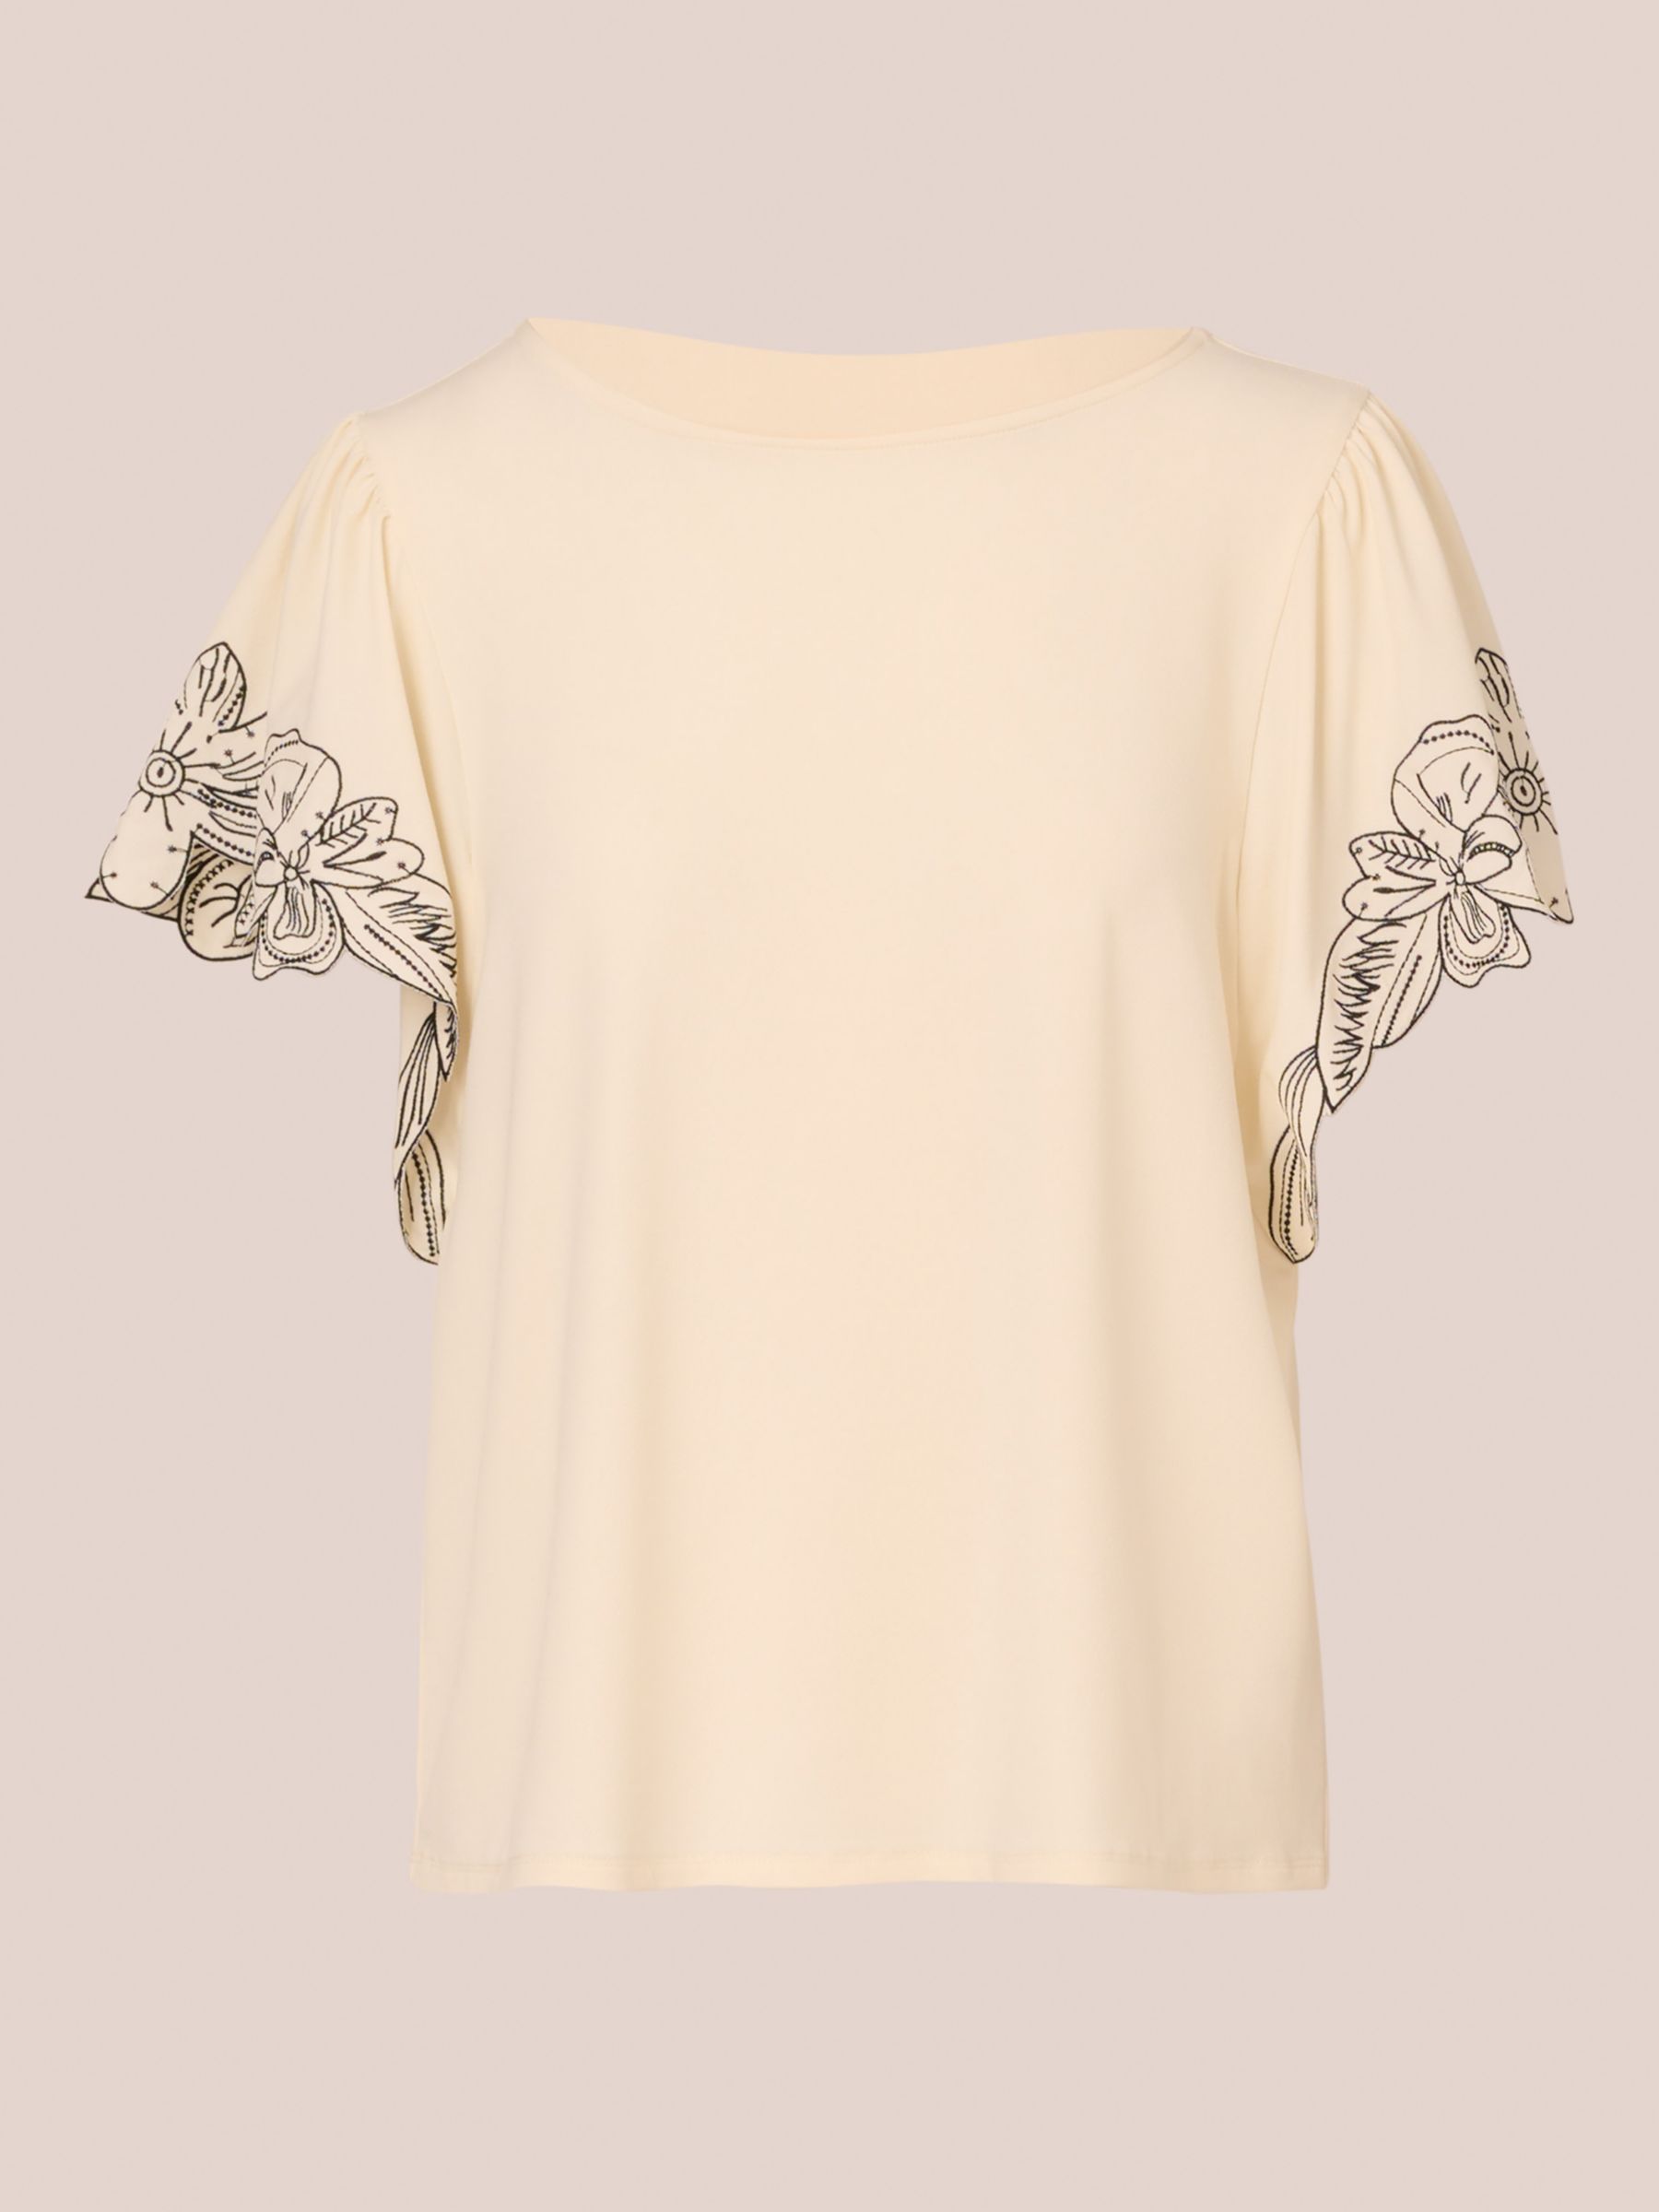 Adrianna Papell Floral Embroidered Sleeve Top, Cream/Black, XS